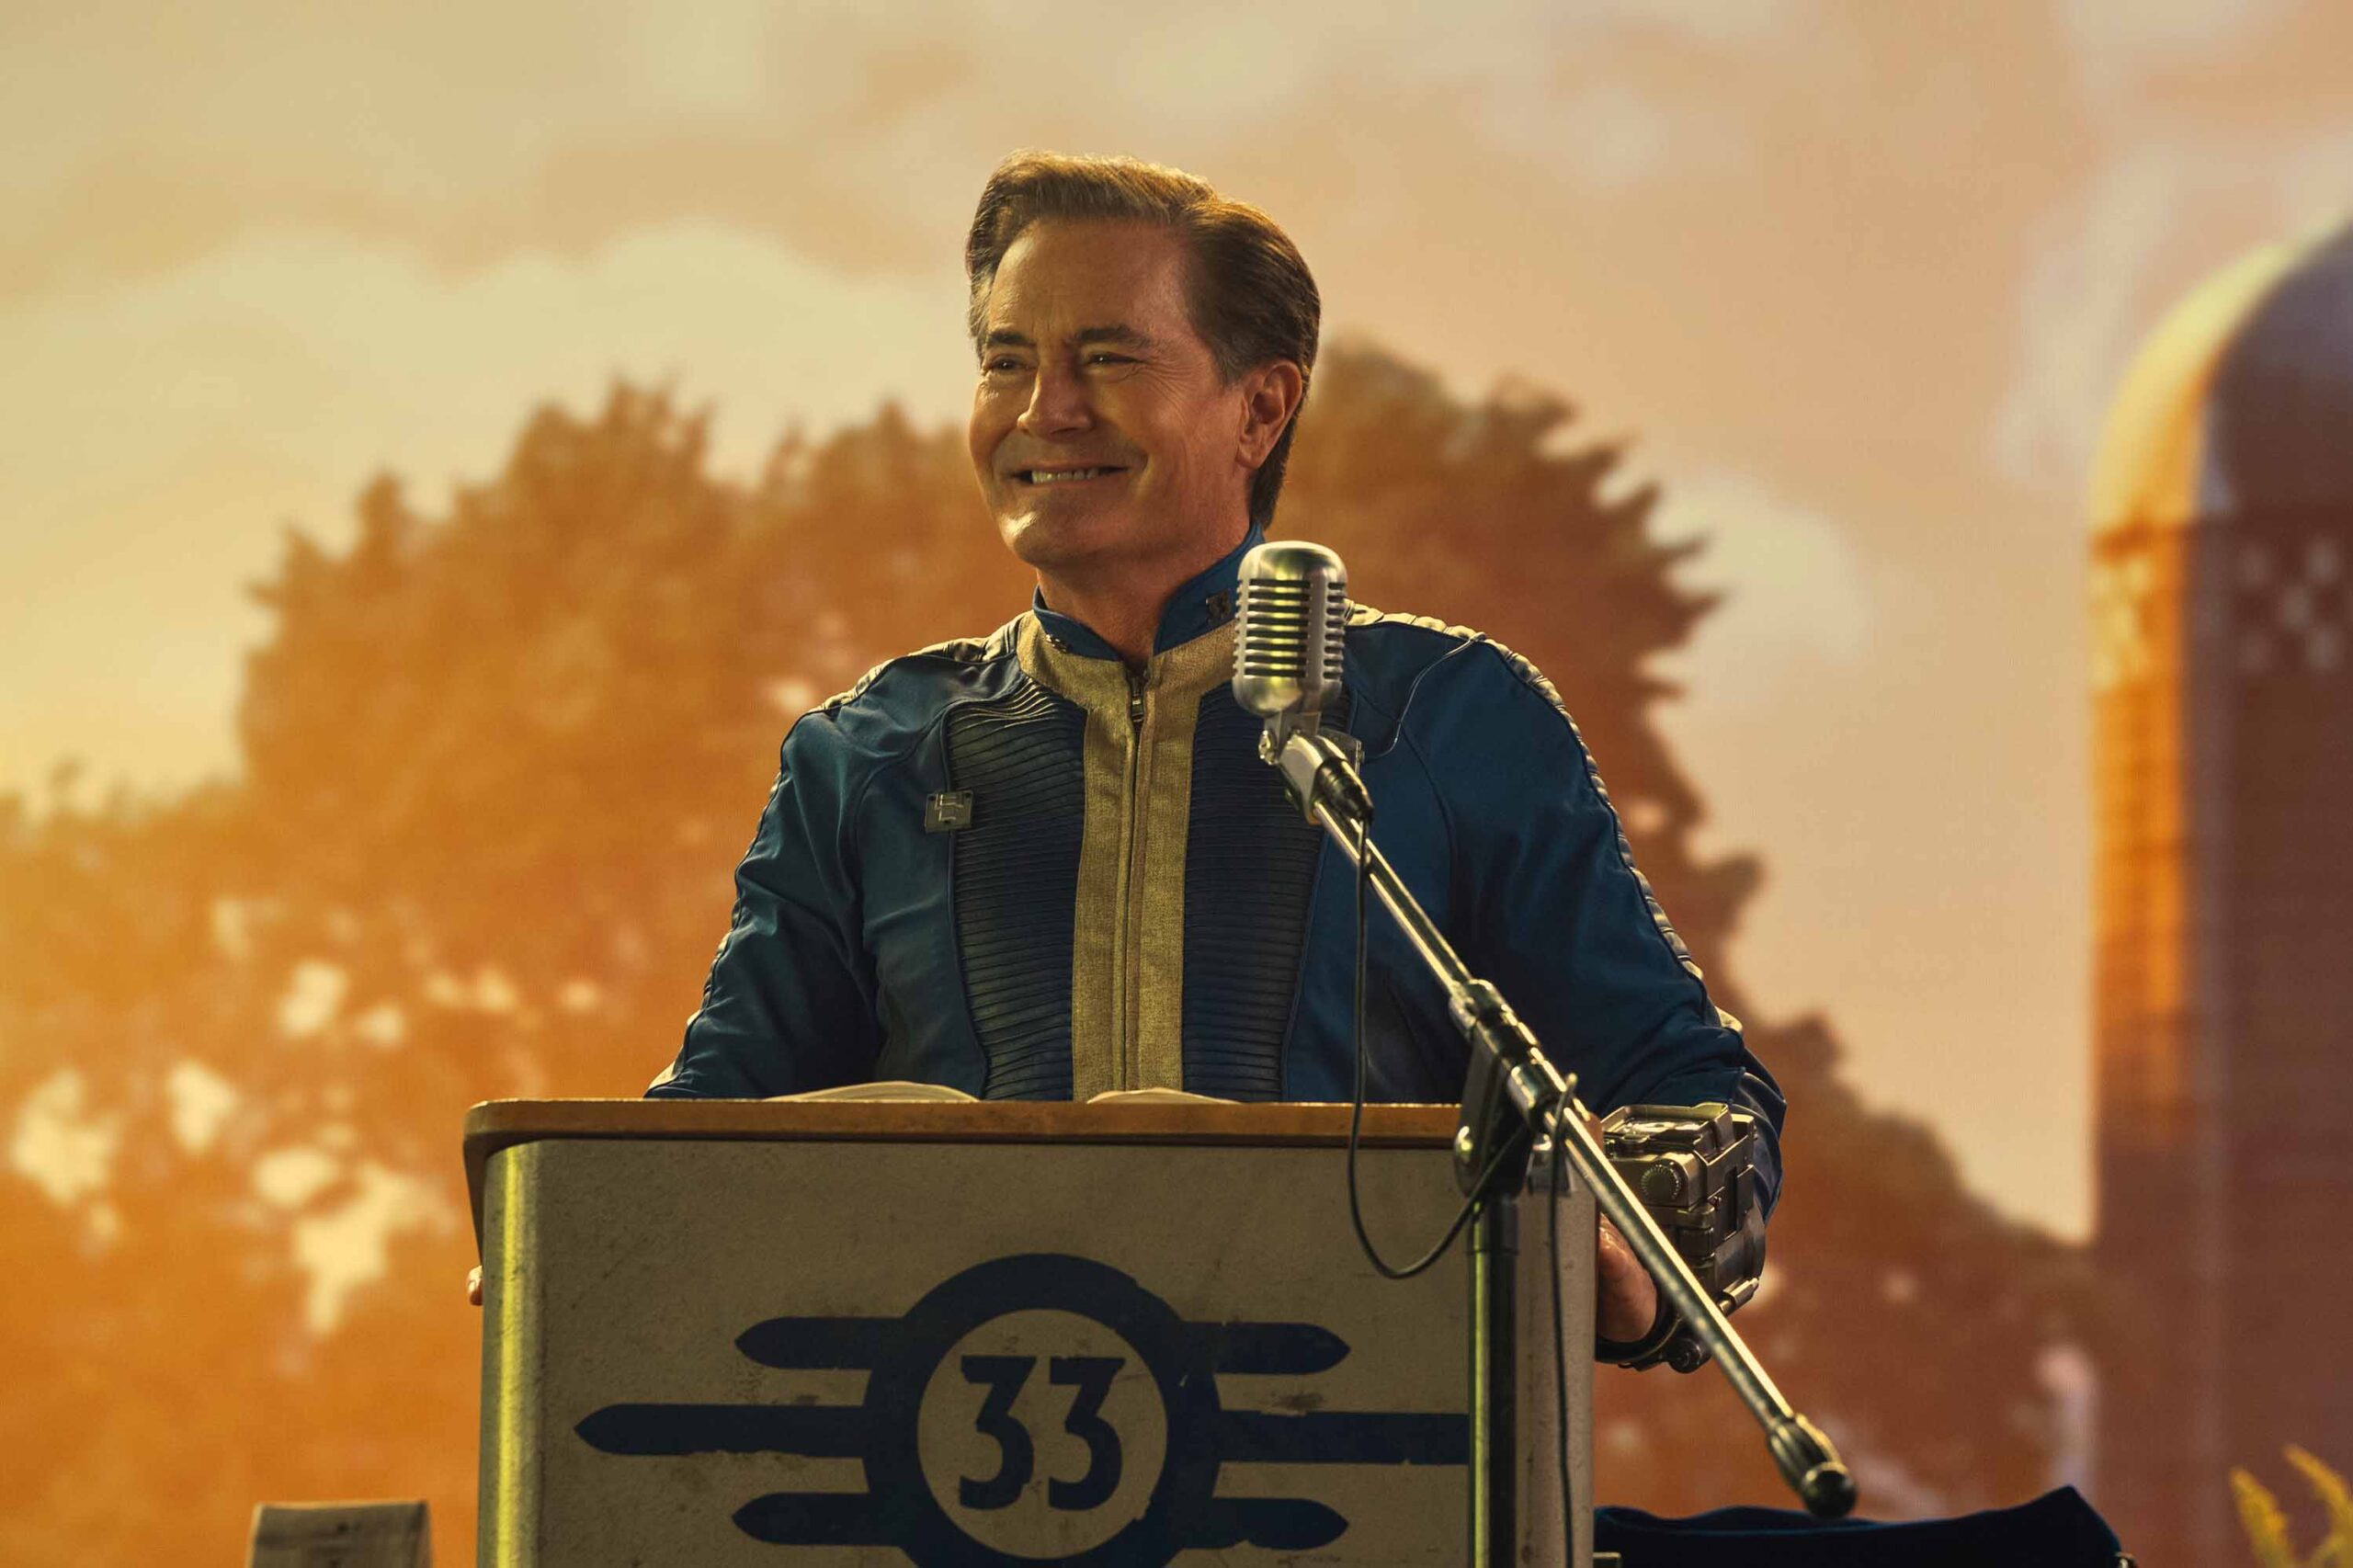 Kyle MacLachlan in Fallout TV show